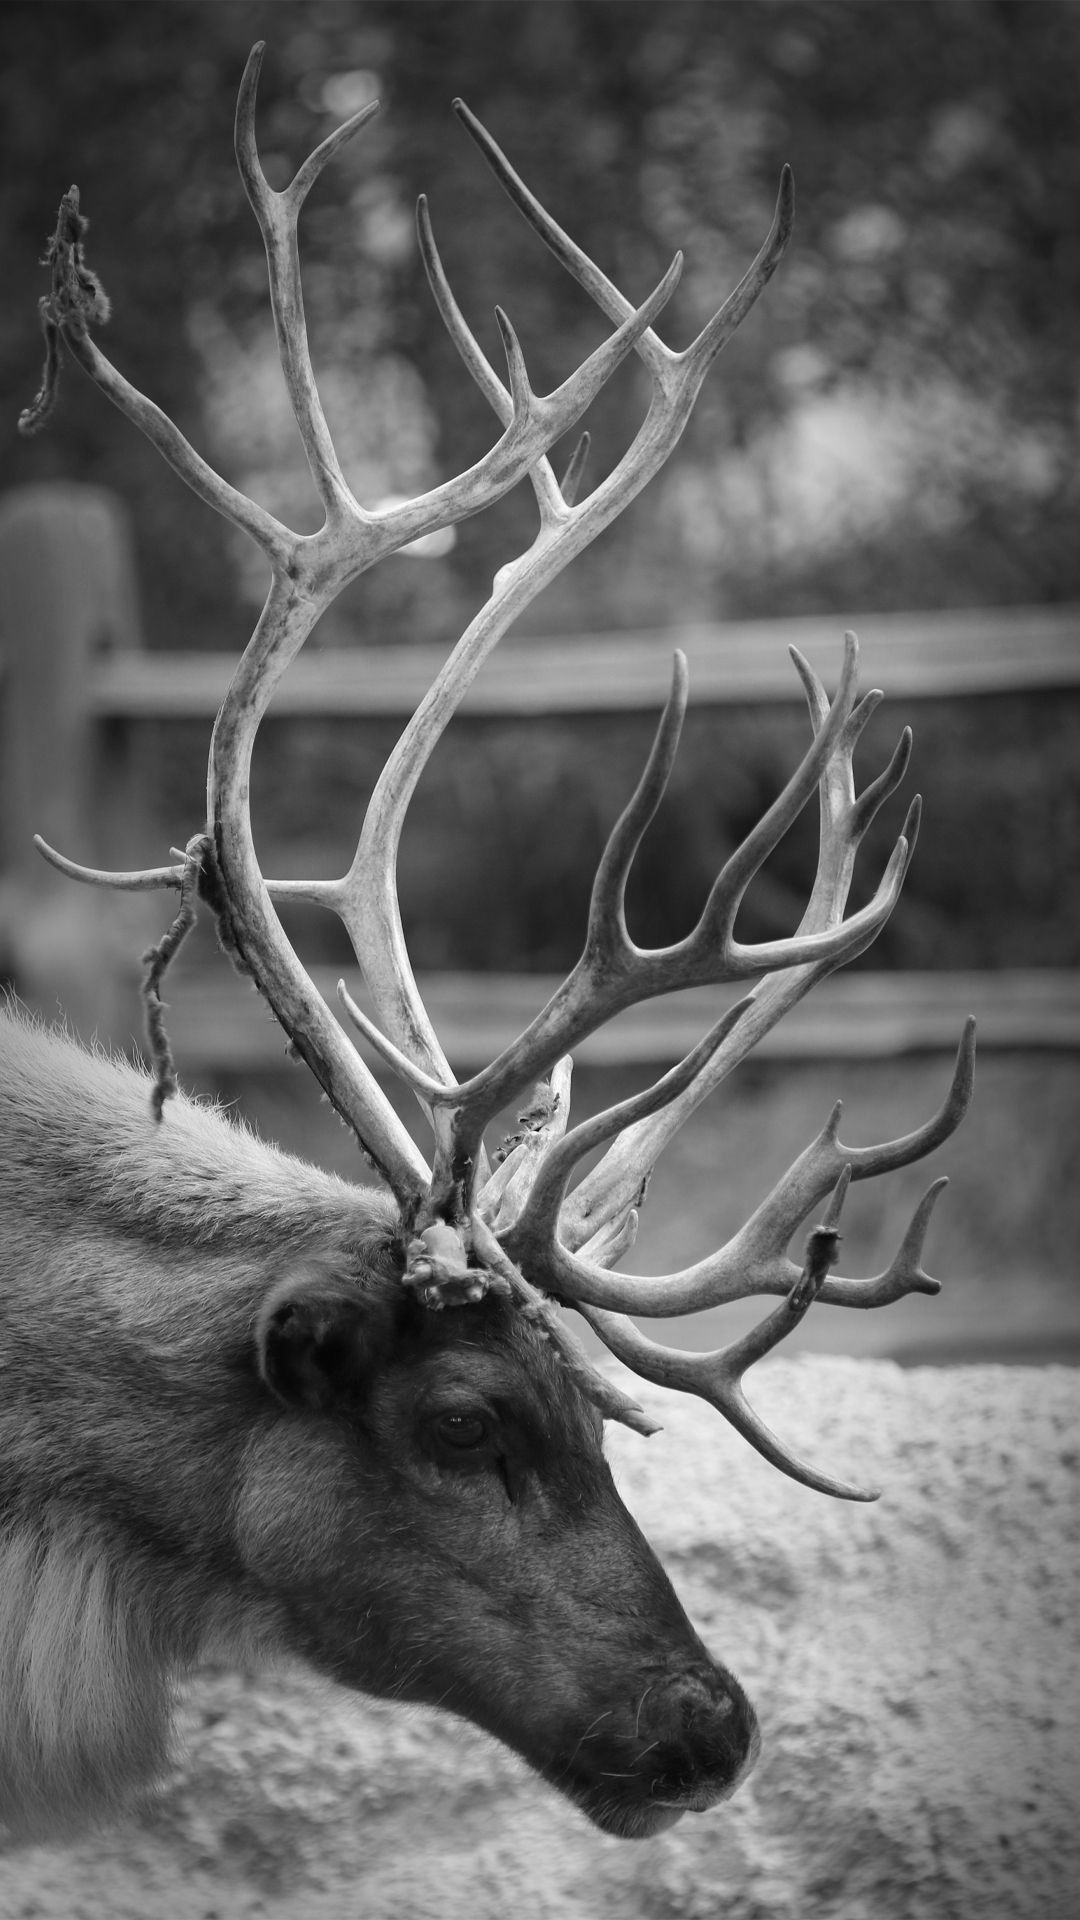 A reindeer with large antlers looks off to the side. - Deer